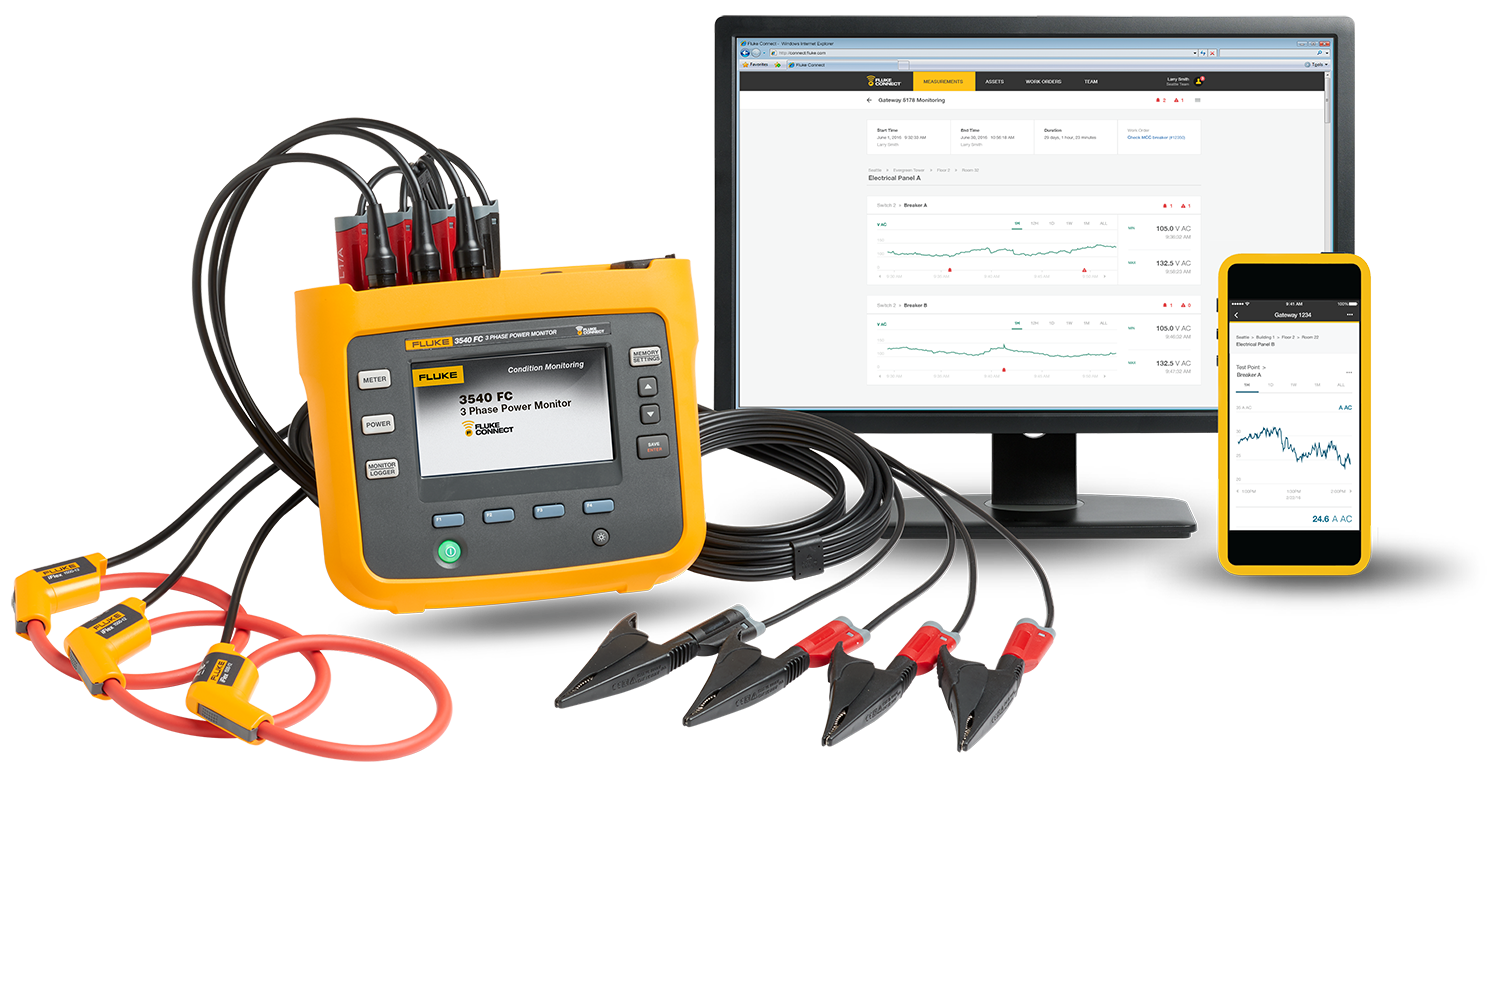 A Fluke 3540 FC Three-Phase Power Monitor and Fluke Connect software shown on a smart device and desktop.